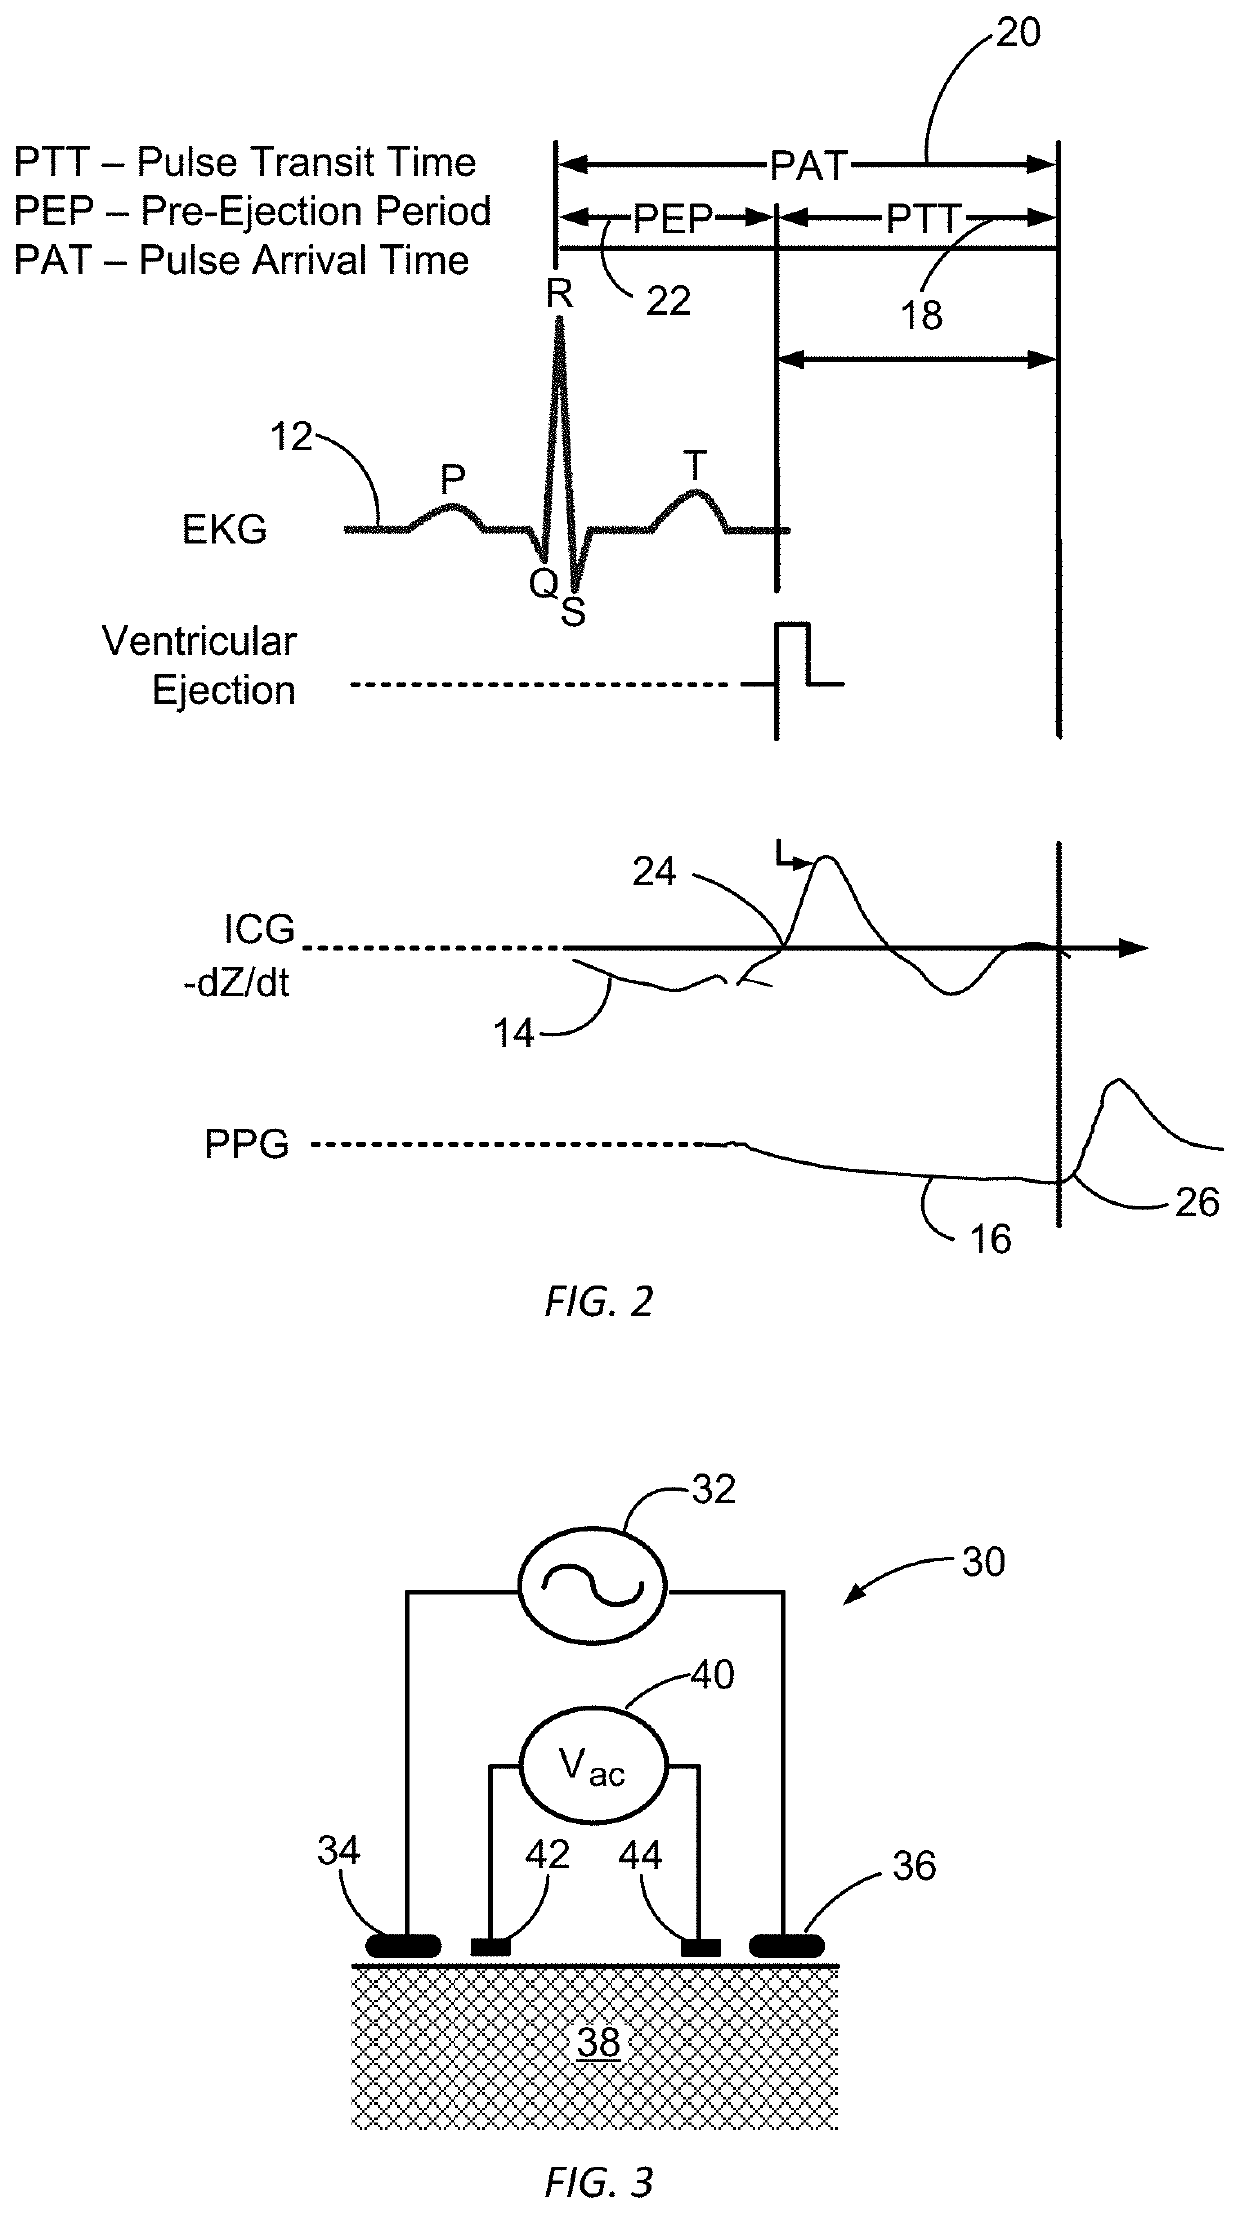 Blood pressure monitoring using a multi-function wrist-worn device